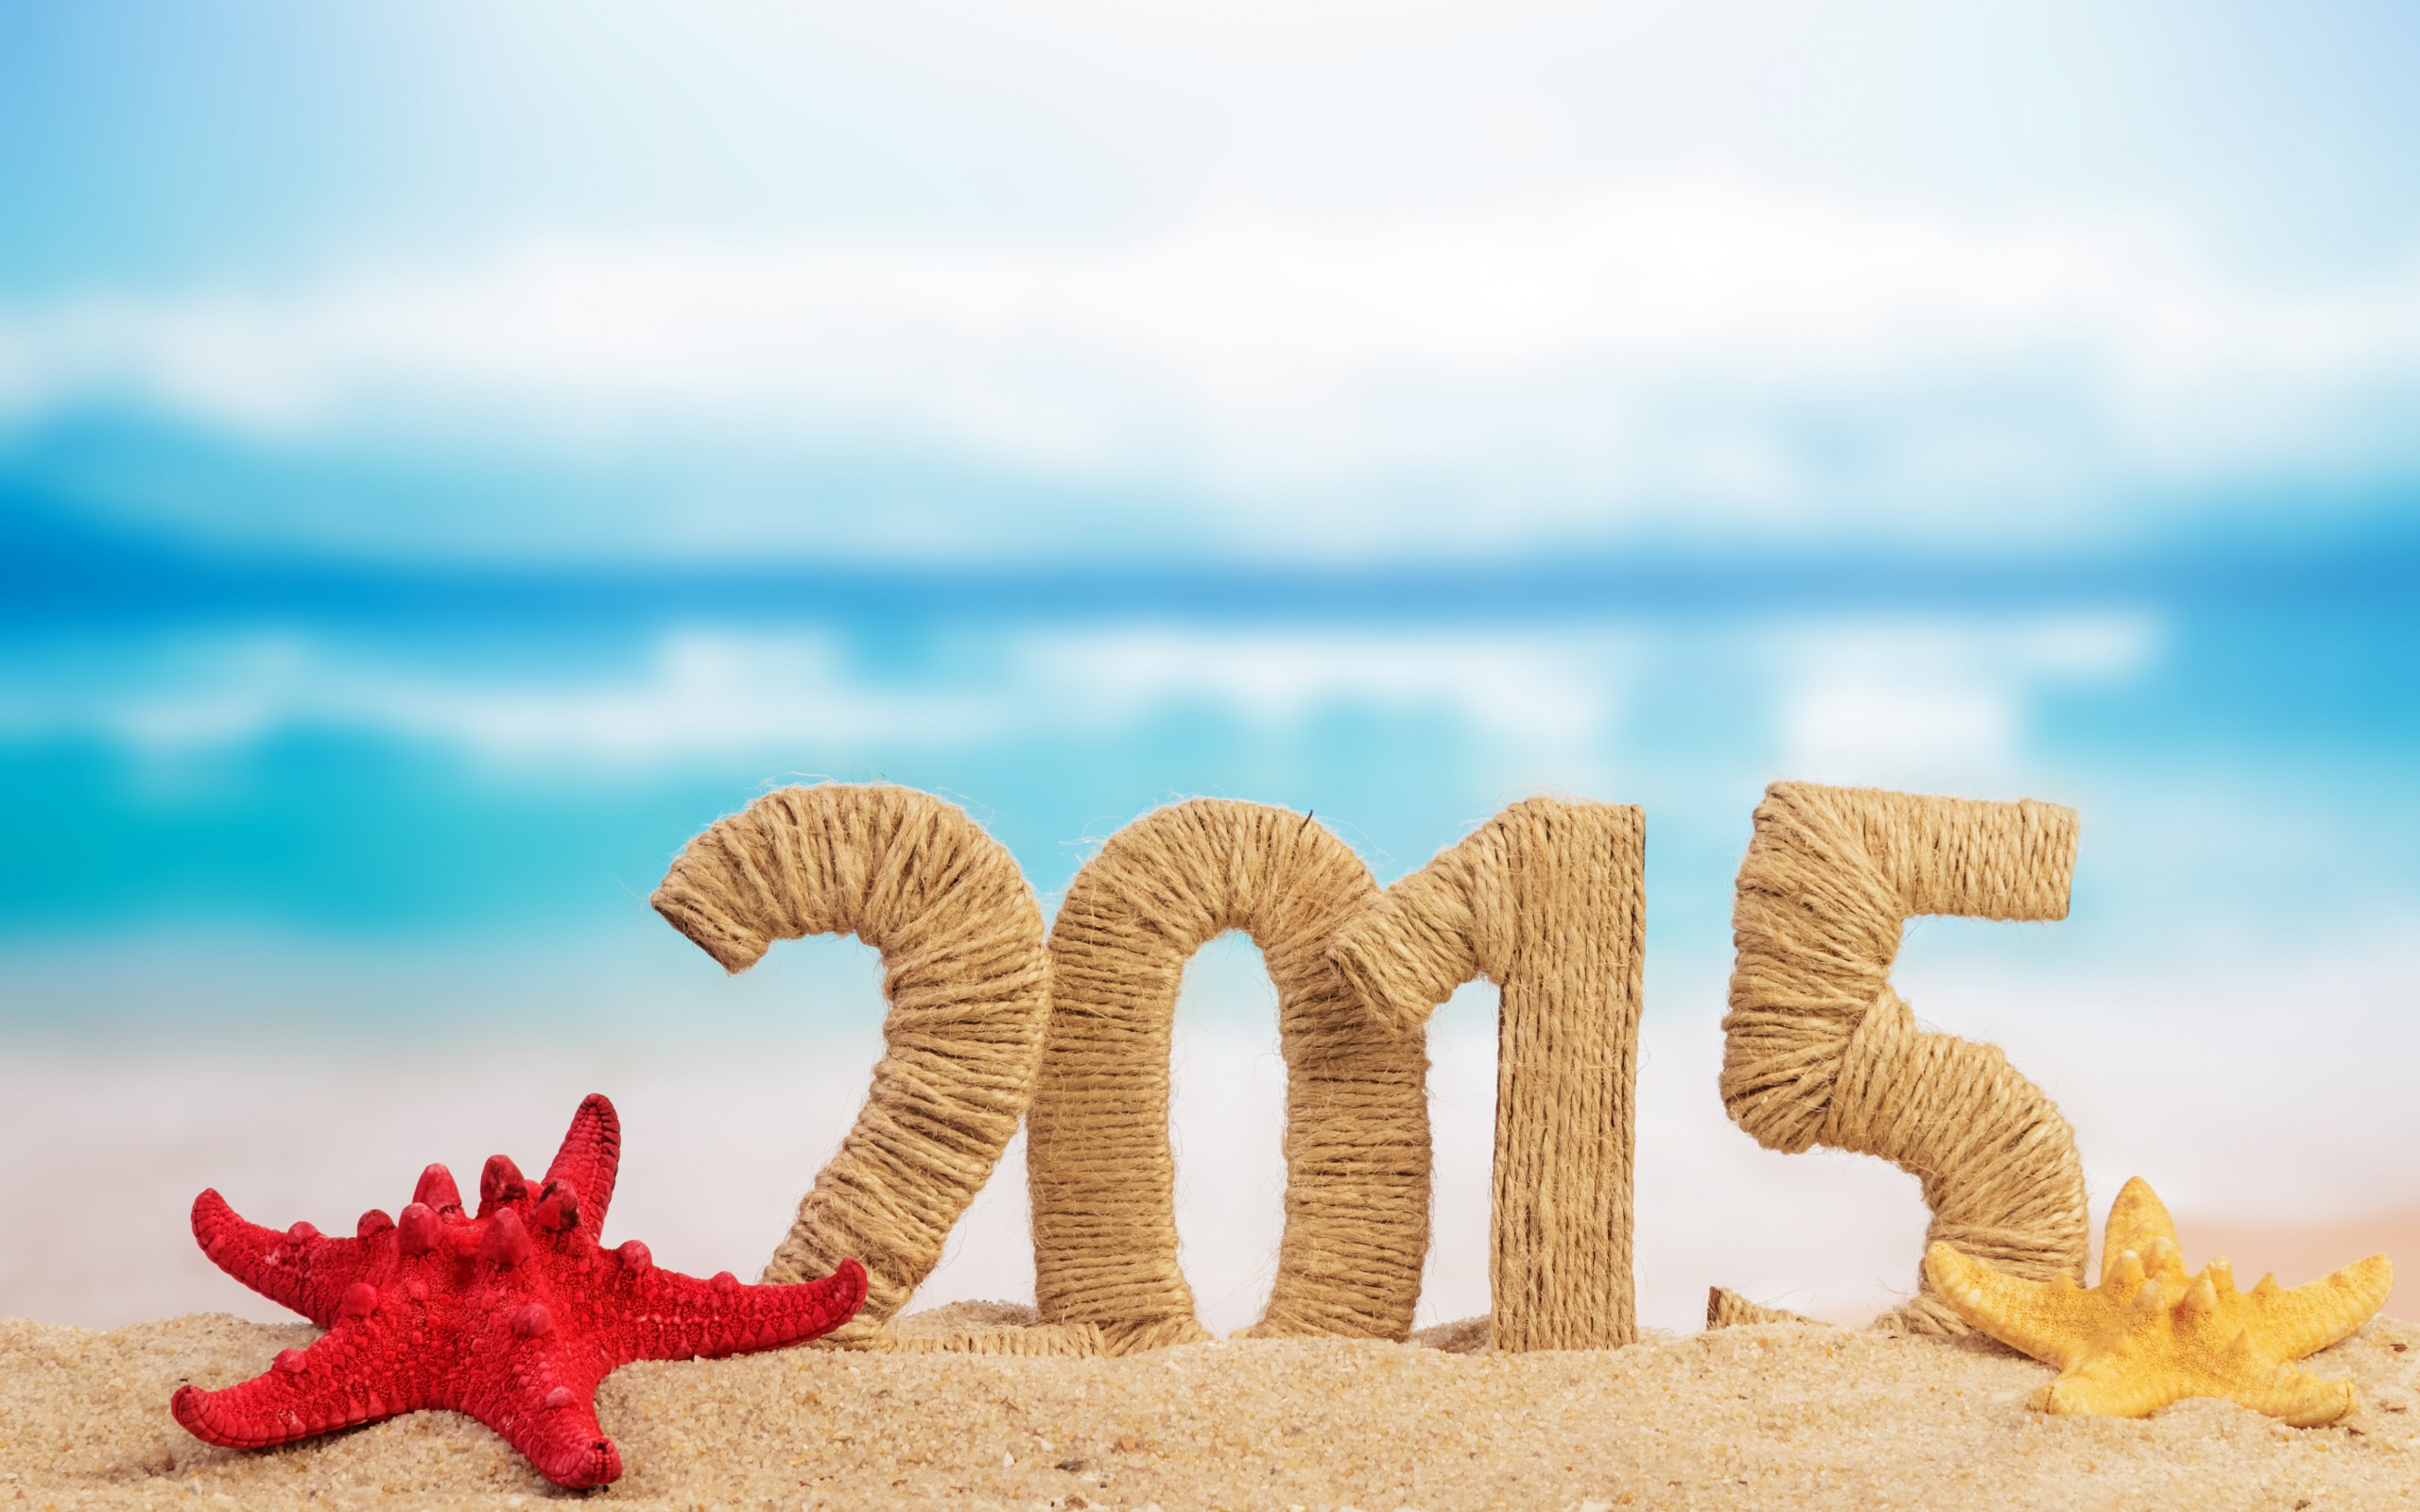 New Lock Screen Wallpapers holiday, new year 2015, celebration, new year, party